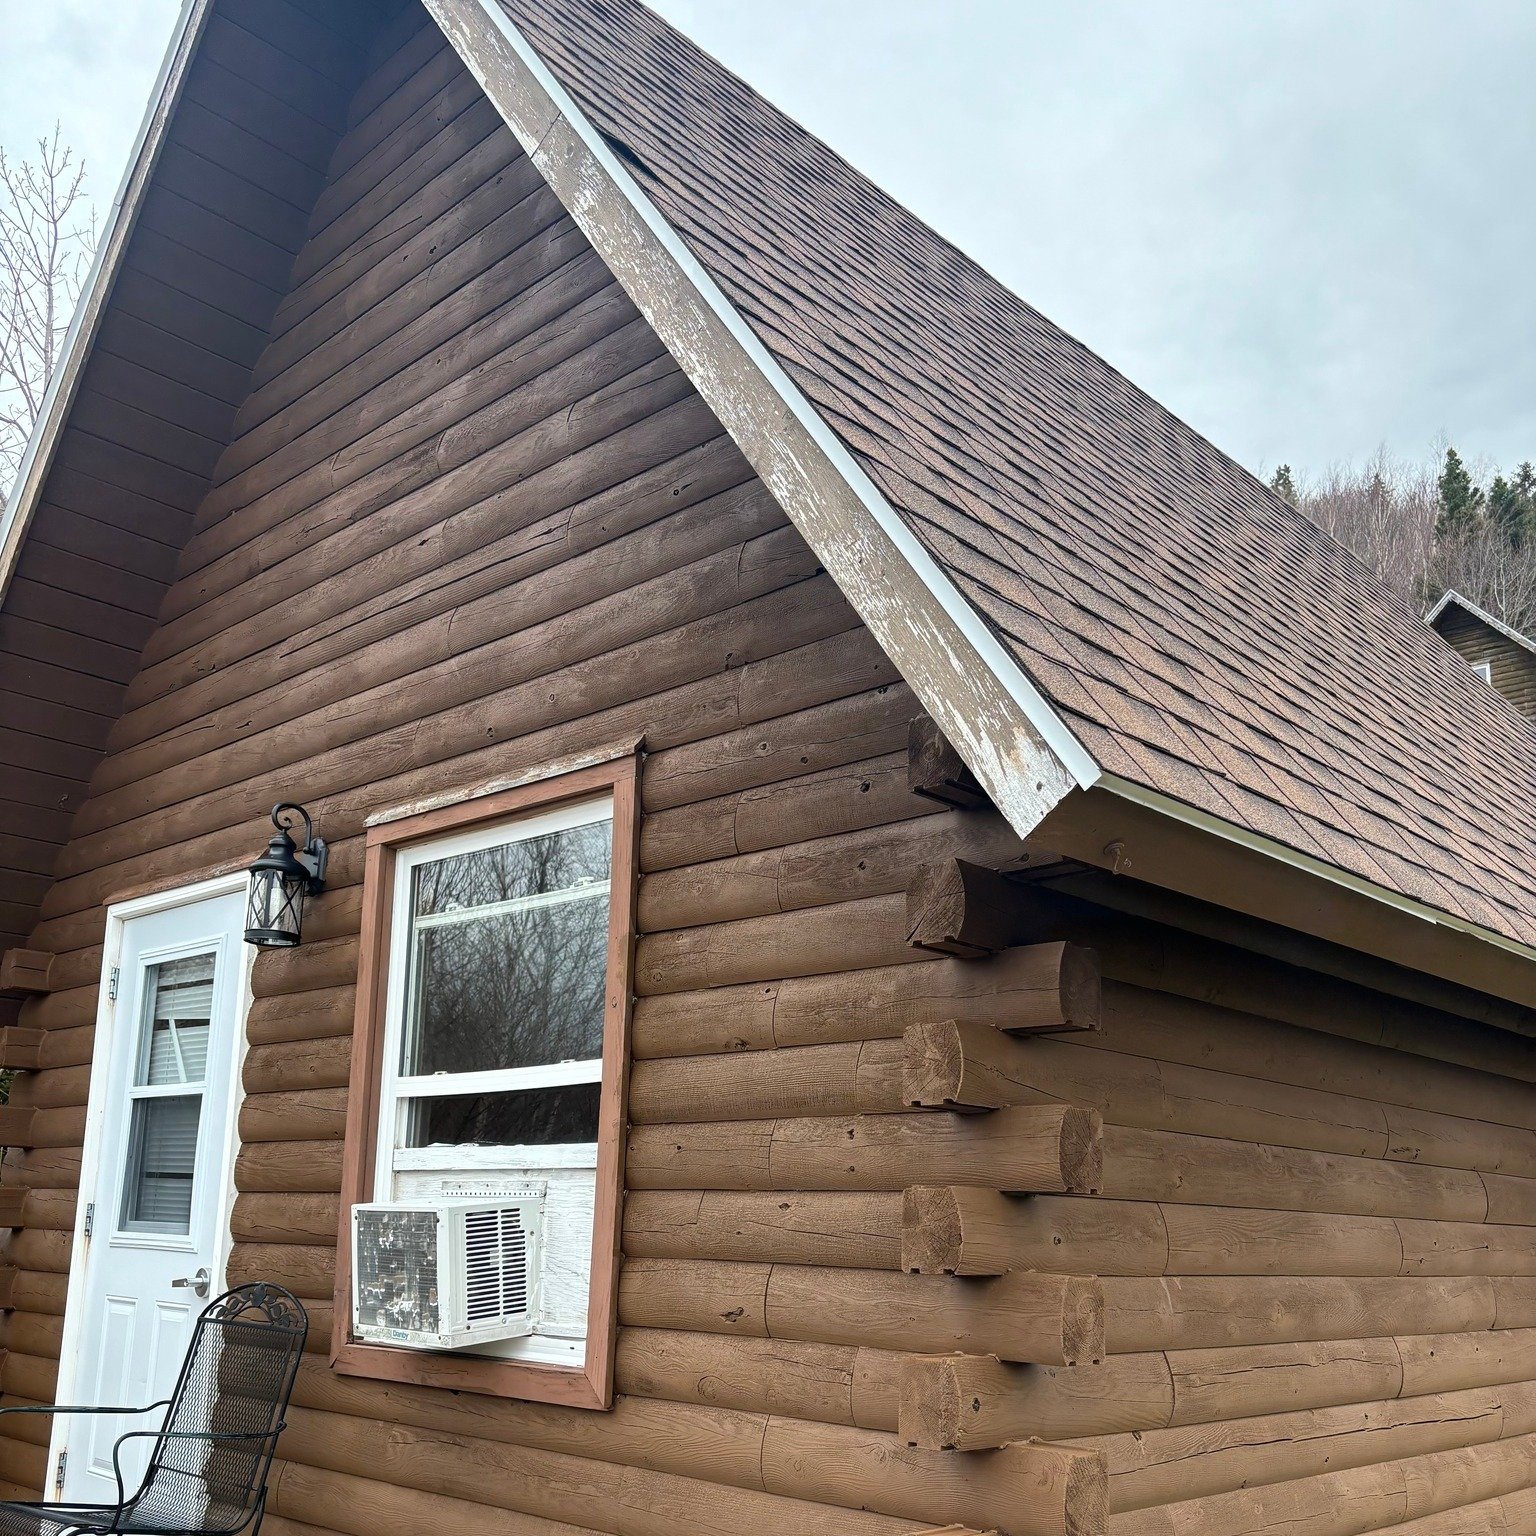 With such a large property, there's always something to do at Glenora.  The chalets are getting an exterior spruce-up right now, and our three 1-bedroom chalets are getting some improvements shortly.  #capebreton #glenoradistillery #cottage #chalets